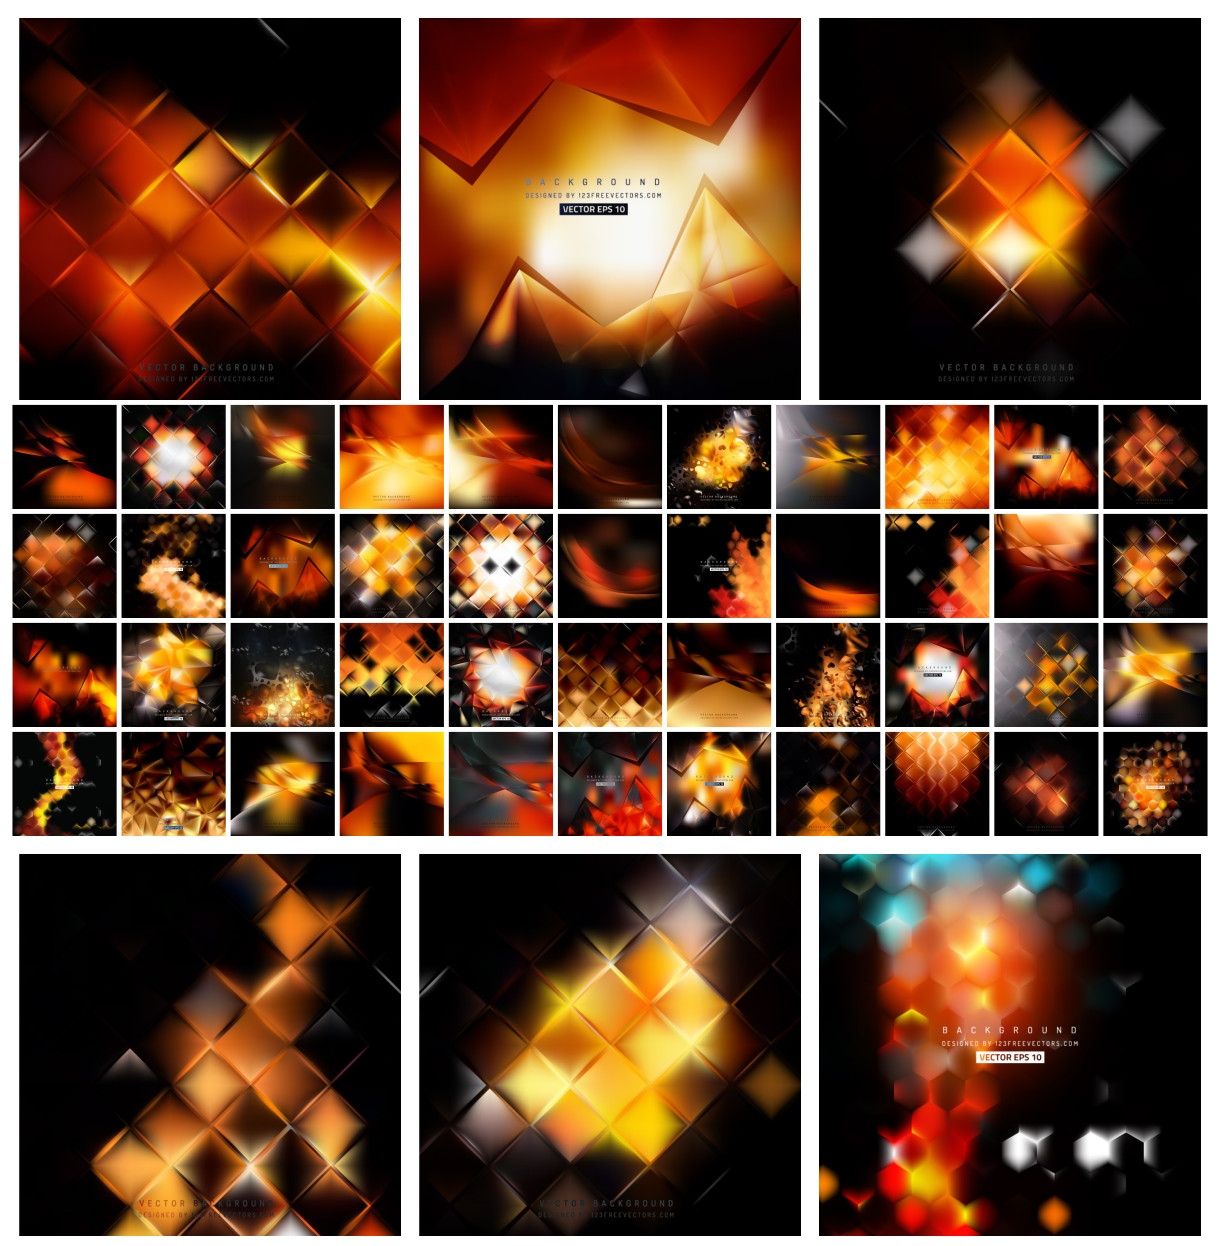 Epic Compilation: Fiery Abstract Vectors